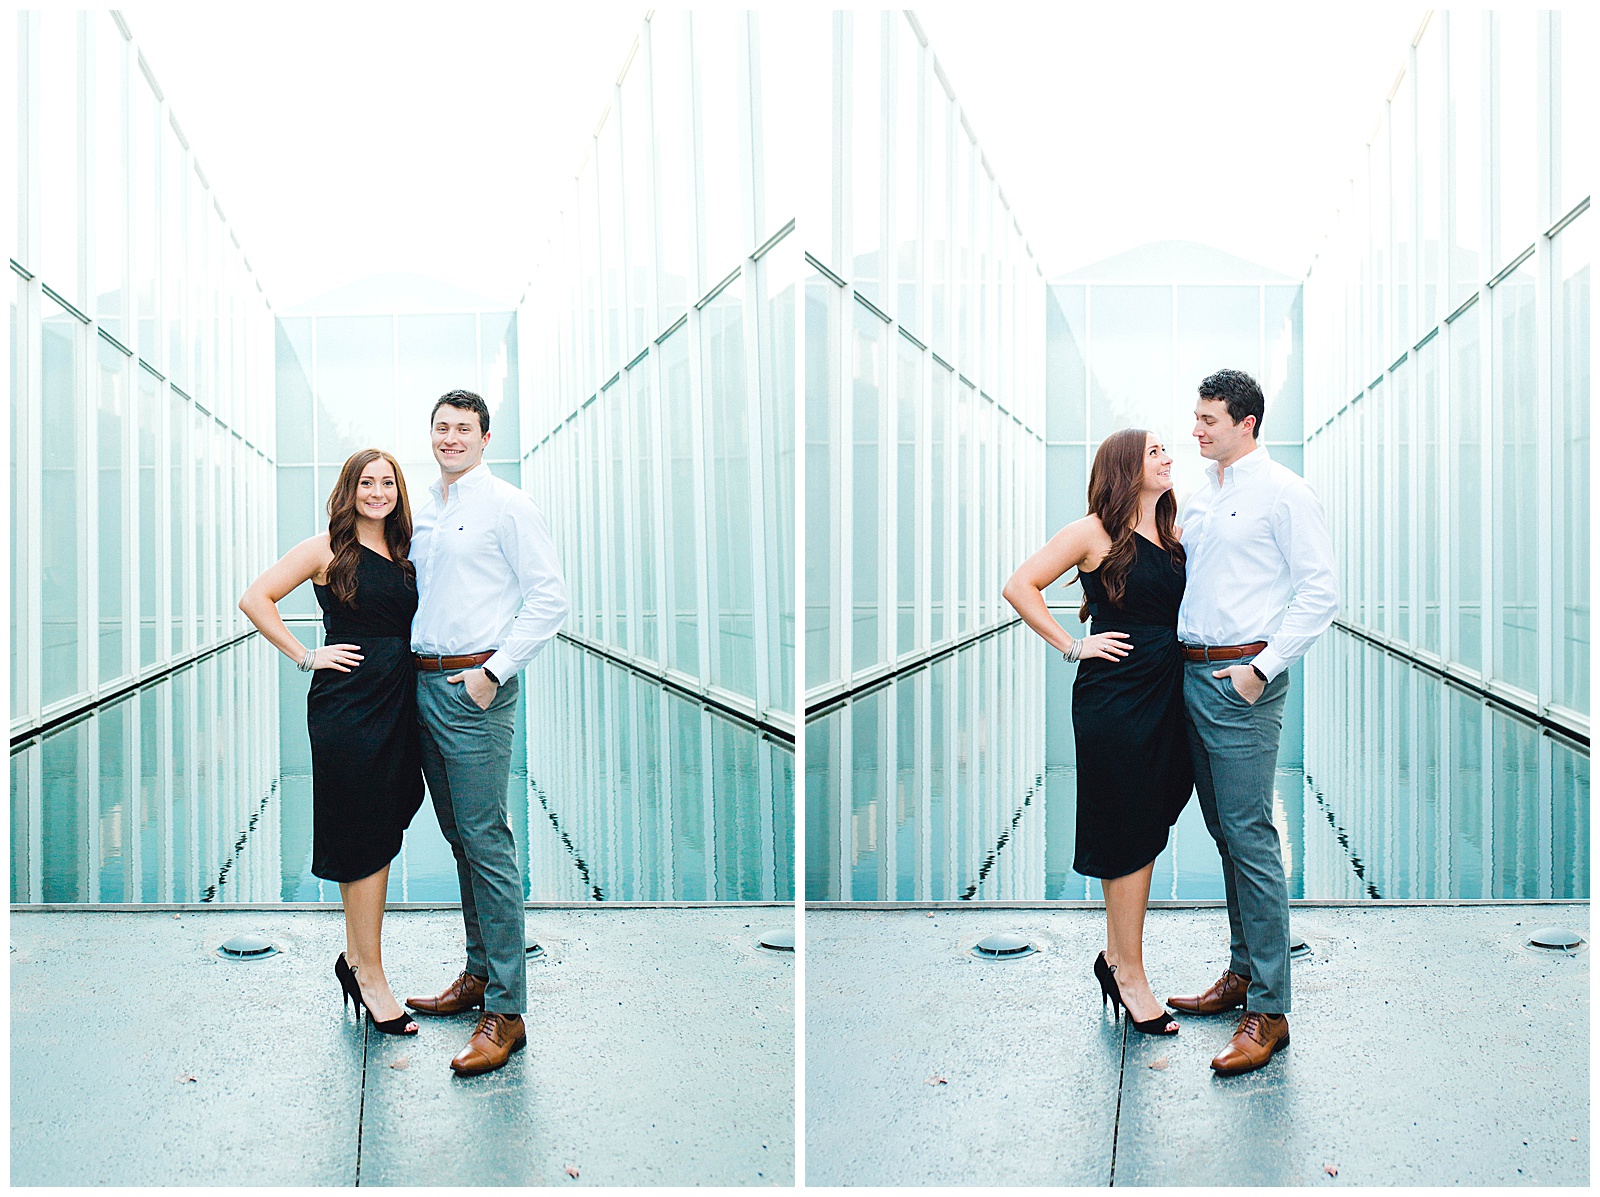 NC Museum of Art Engagement Session